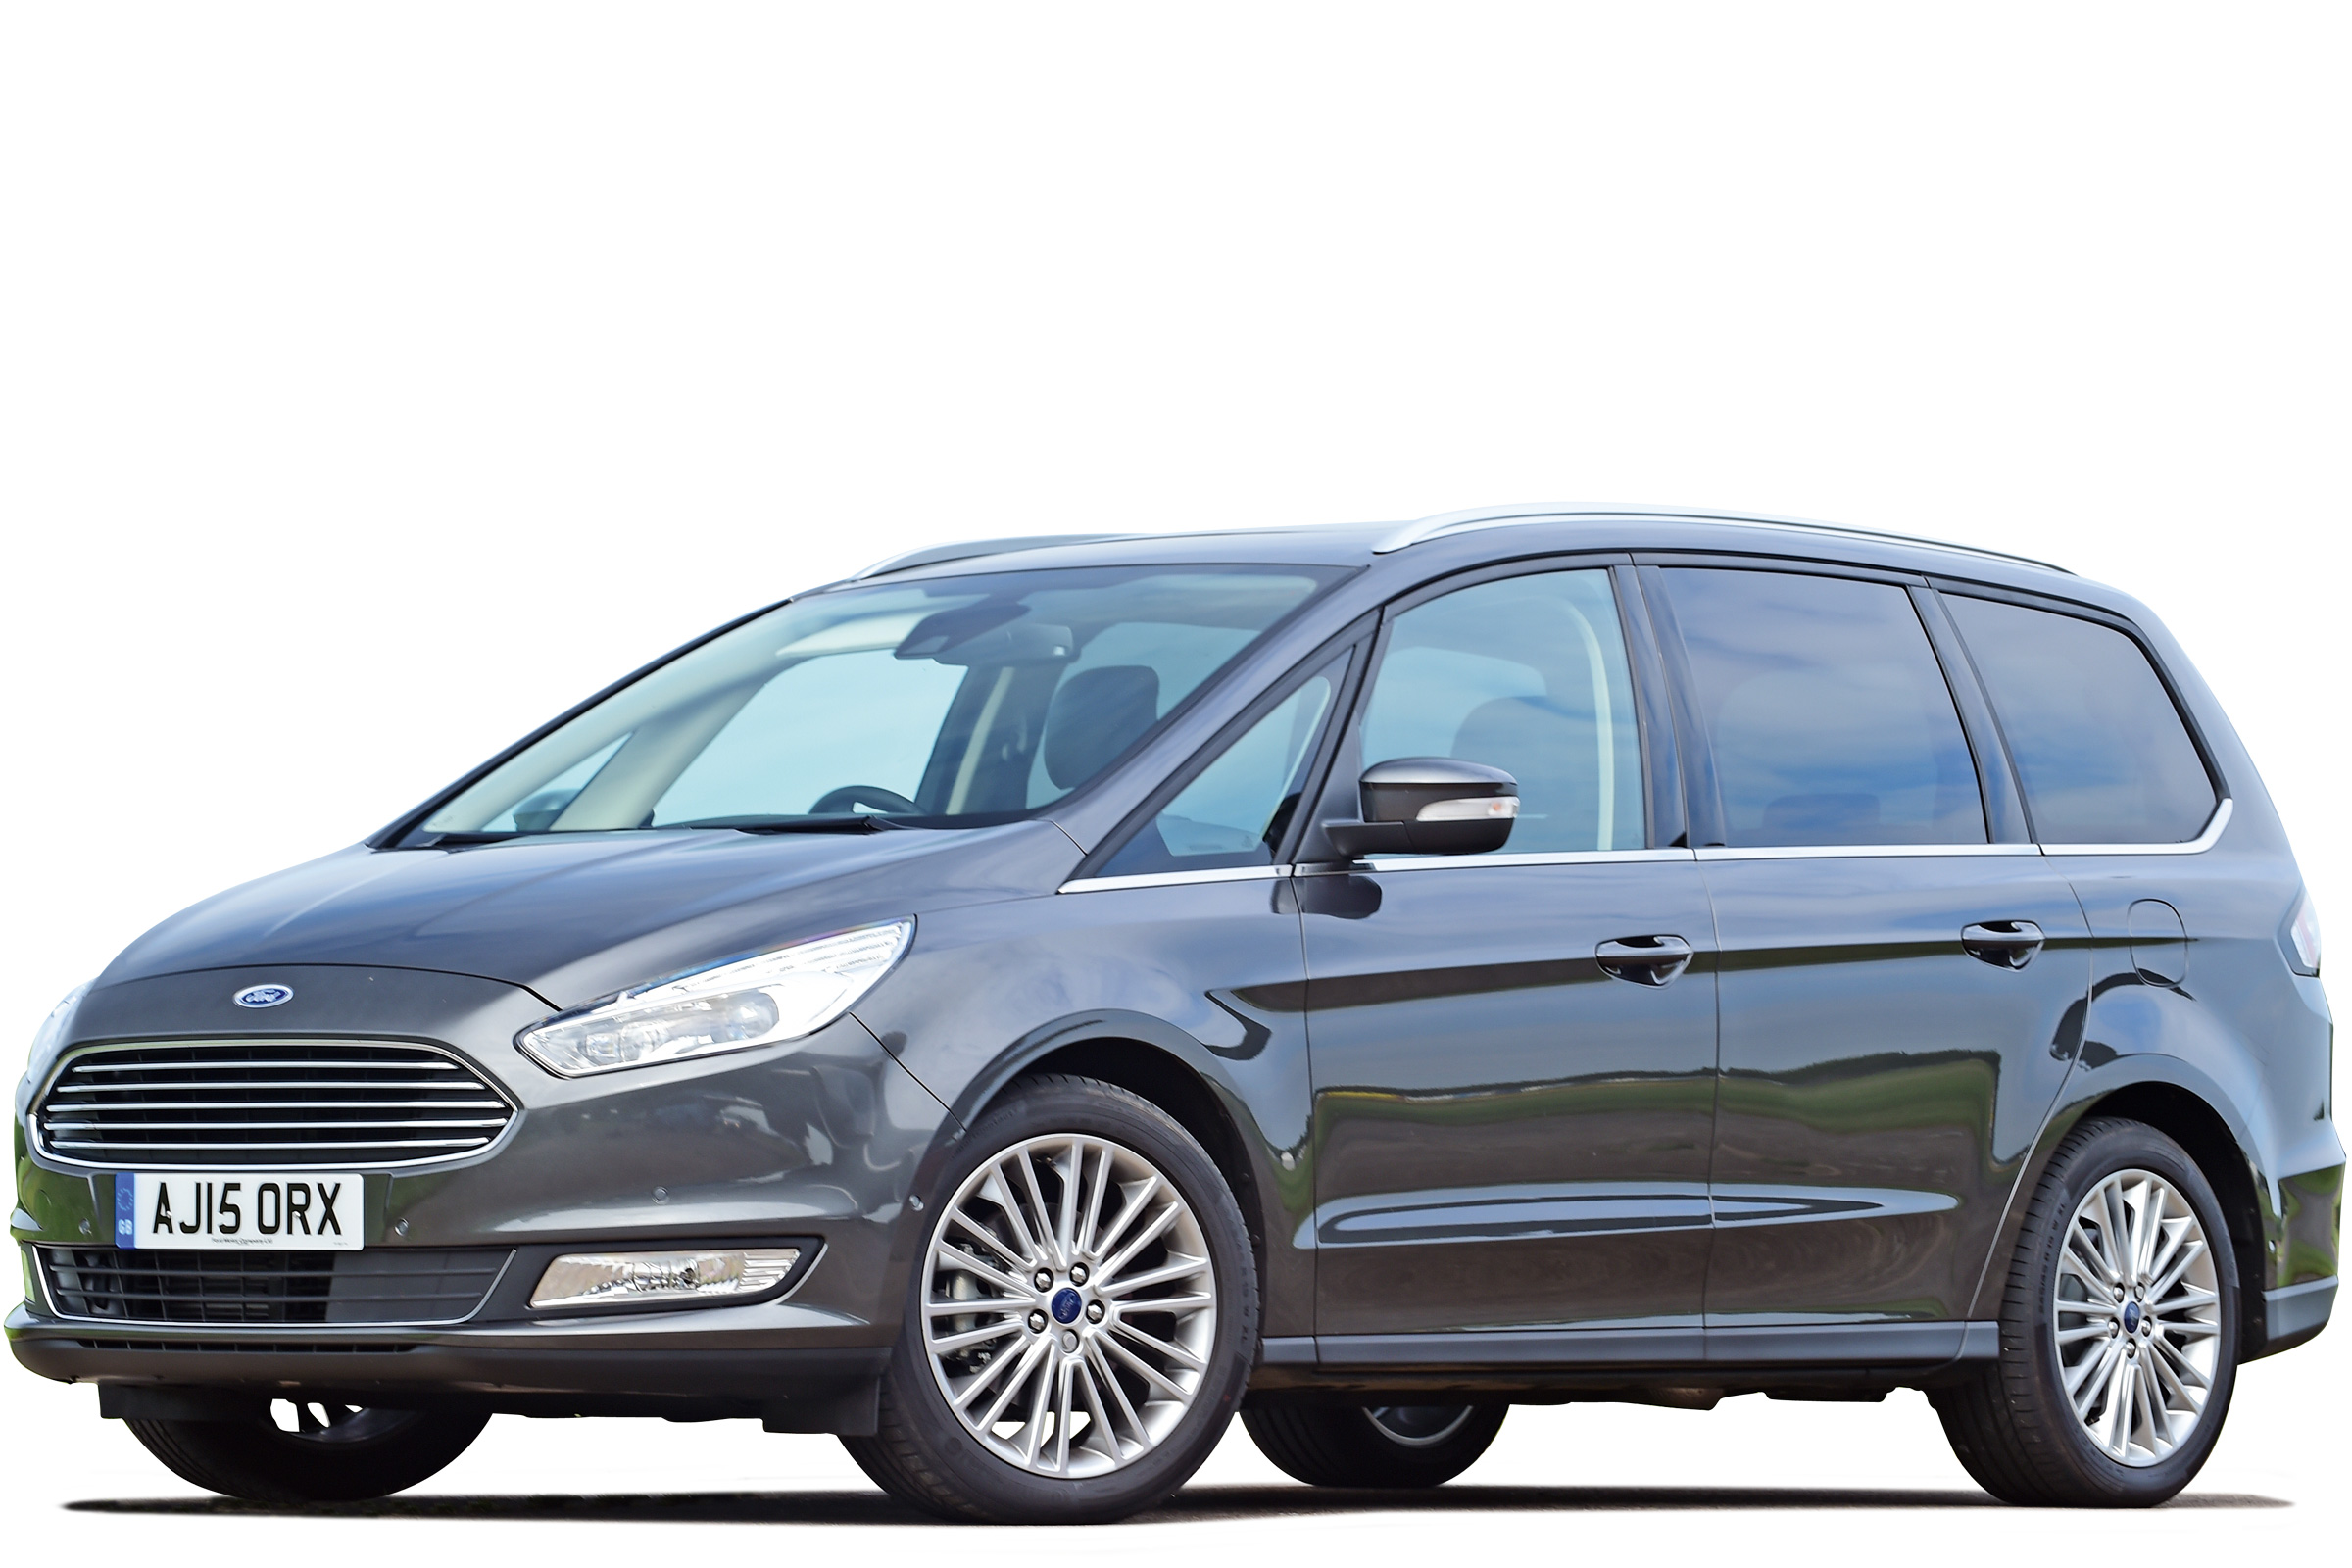 Ford Galaxy Owner Reviews Mpg Problems Reliability Review Carbuyer